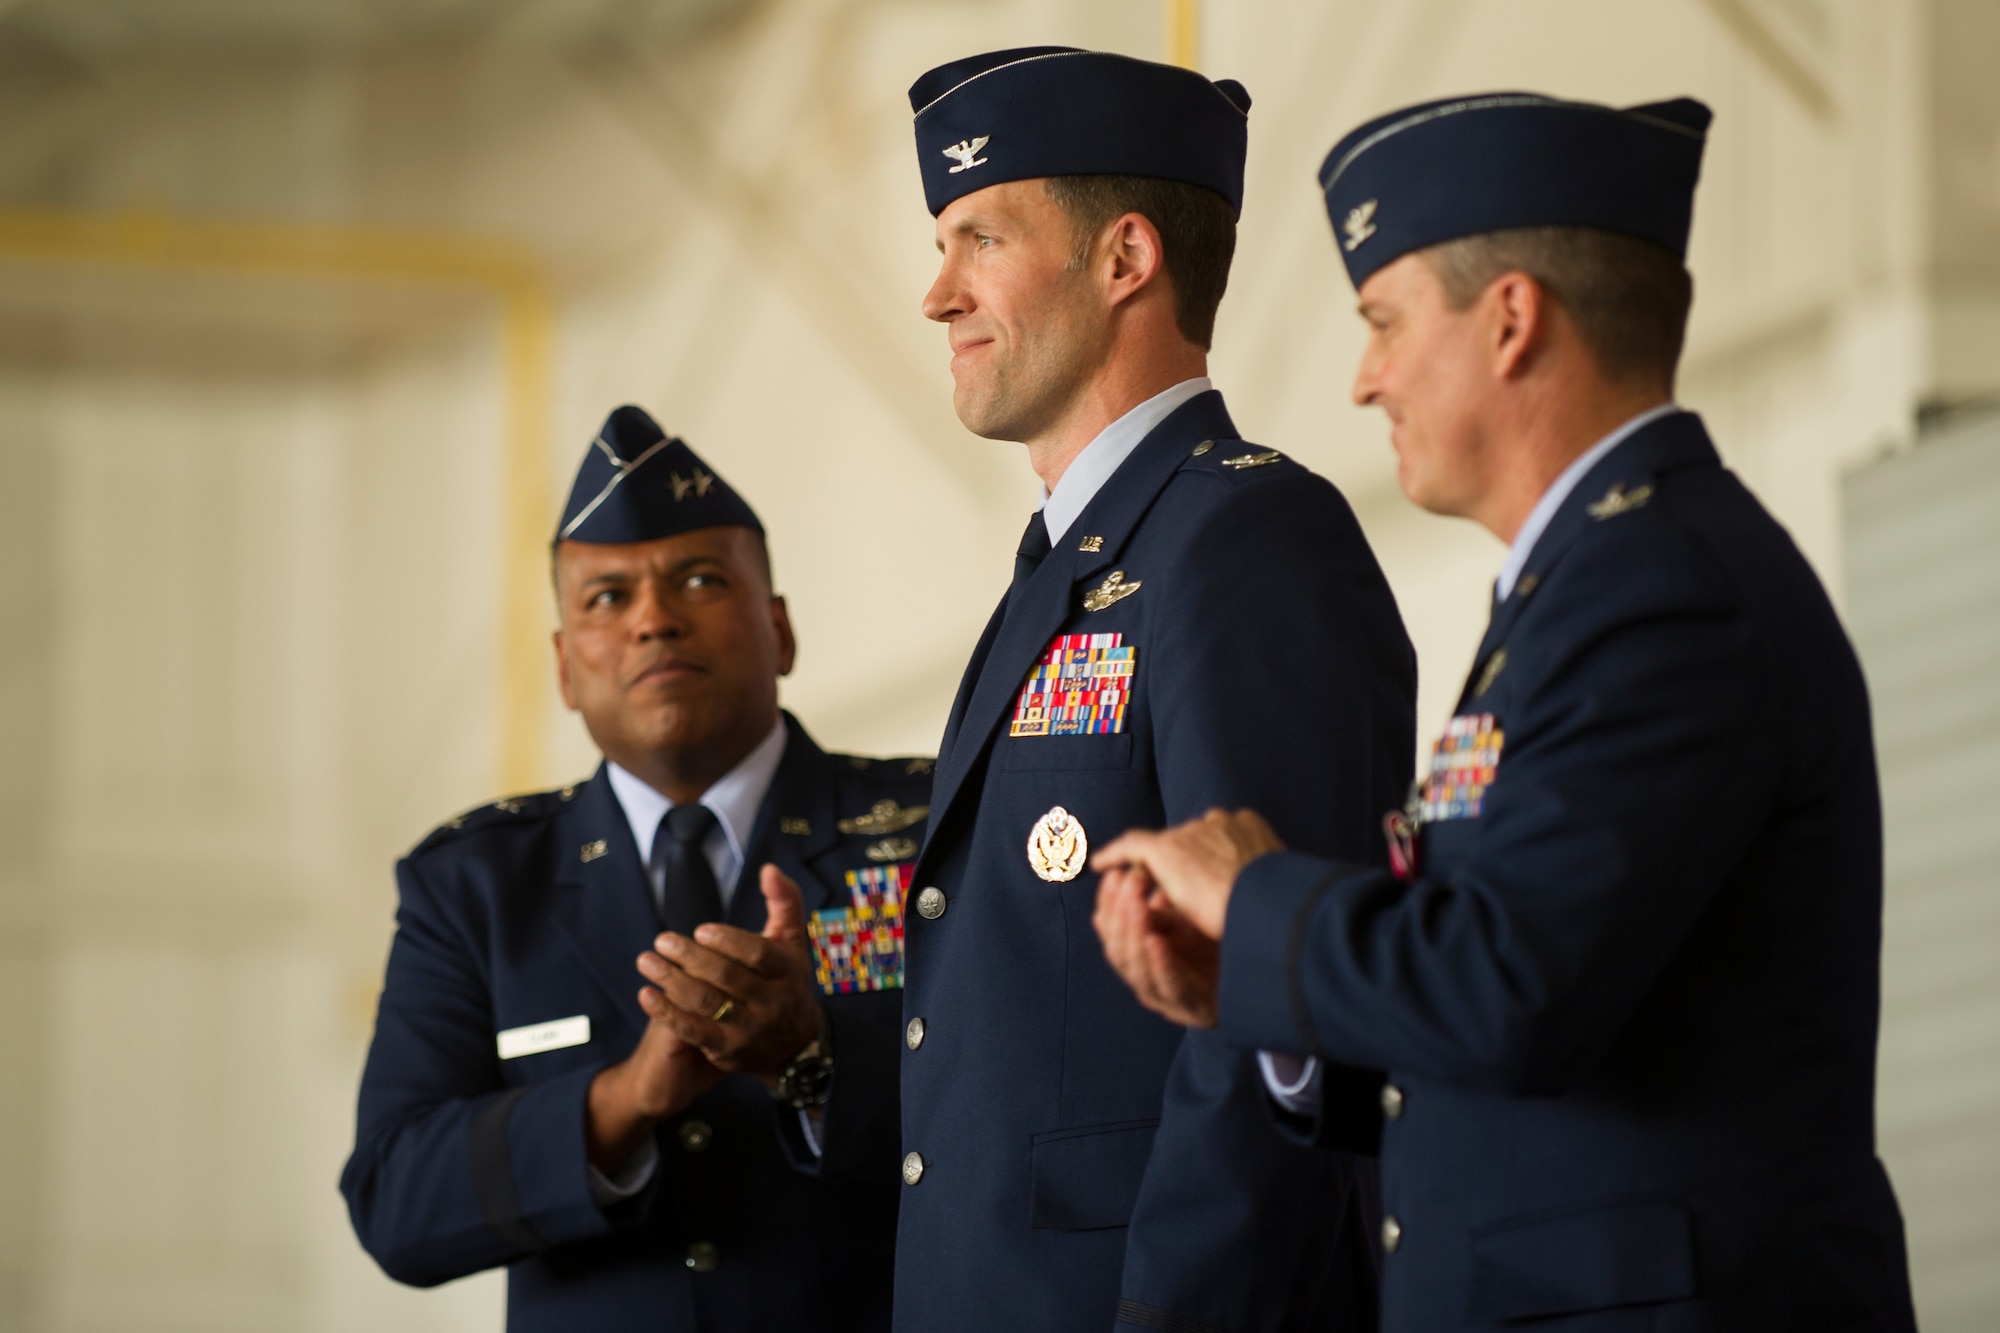 Maj. Gen. Richard Clark, Eighth Air Force commander, and Col. Jason Armagost applaud Col. Michael Brooks as he is officially named commander of the 5th Bomb Wing during the 5th BW change of command ceremony at Minot Air Force Base, N.D., June 3, 2016. Brooks is the 5th BW’s 54th commander. (U.S. Air Force photo/Senior Airman Apryl Hall)